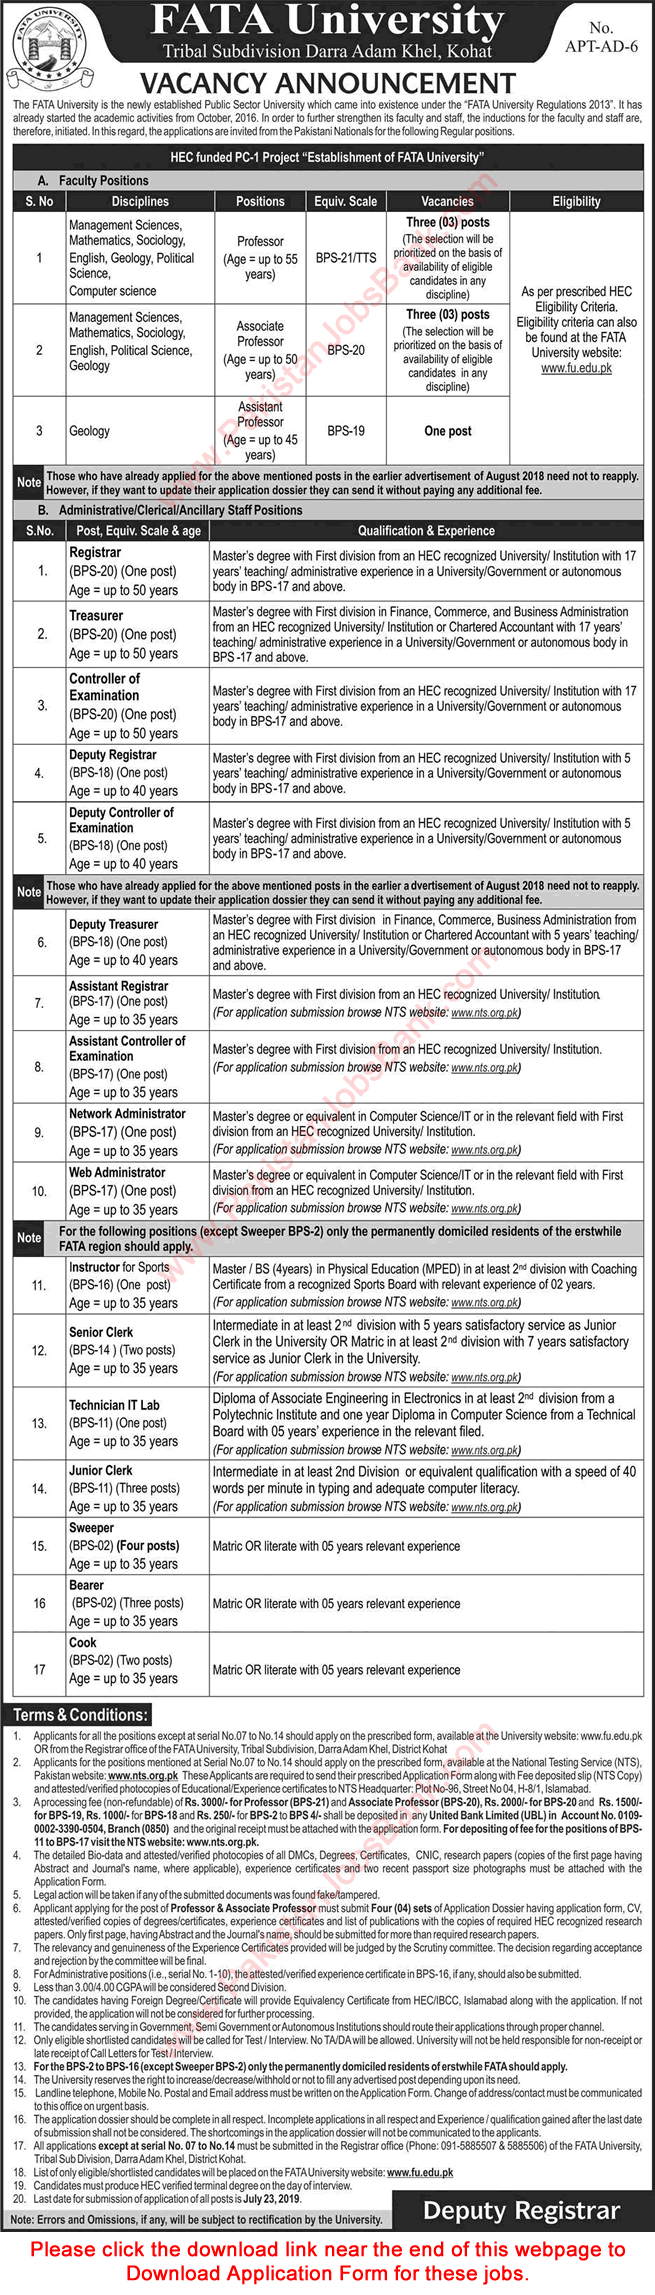 FATA University Jobs July 2019 Kohat NTS Application Form Teaching Faculty & Others Latest